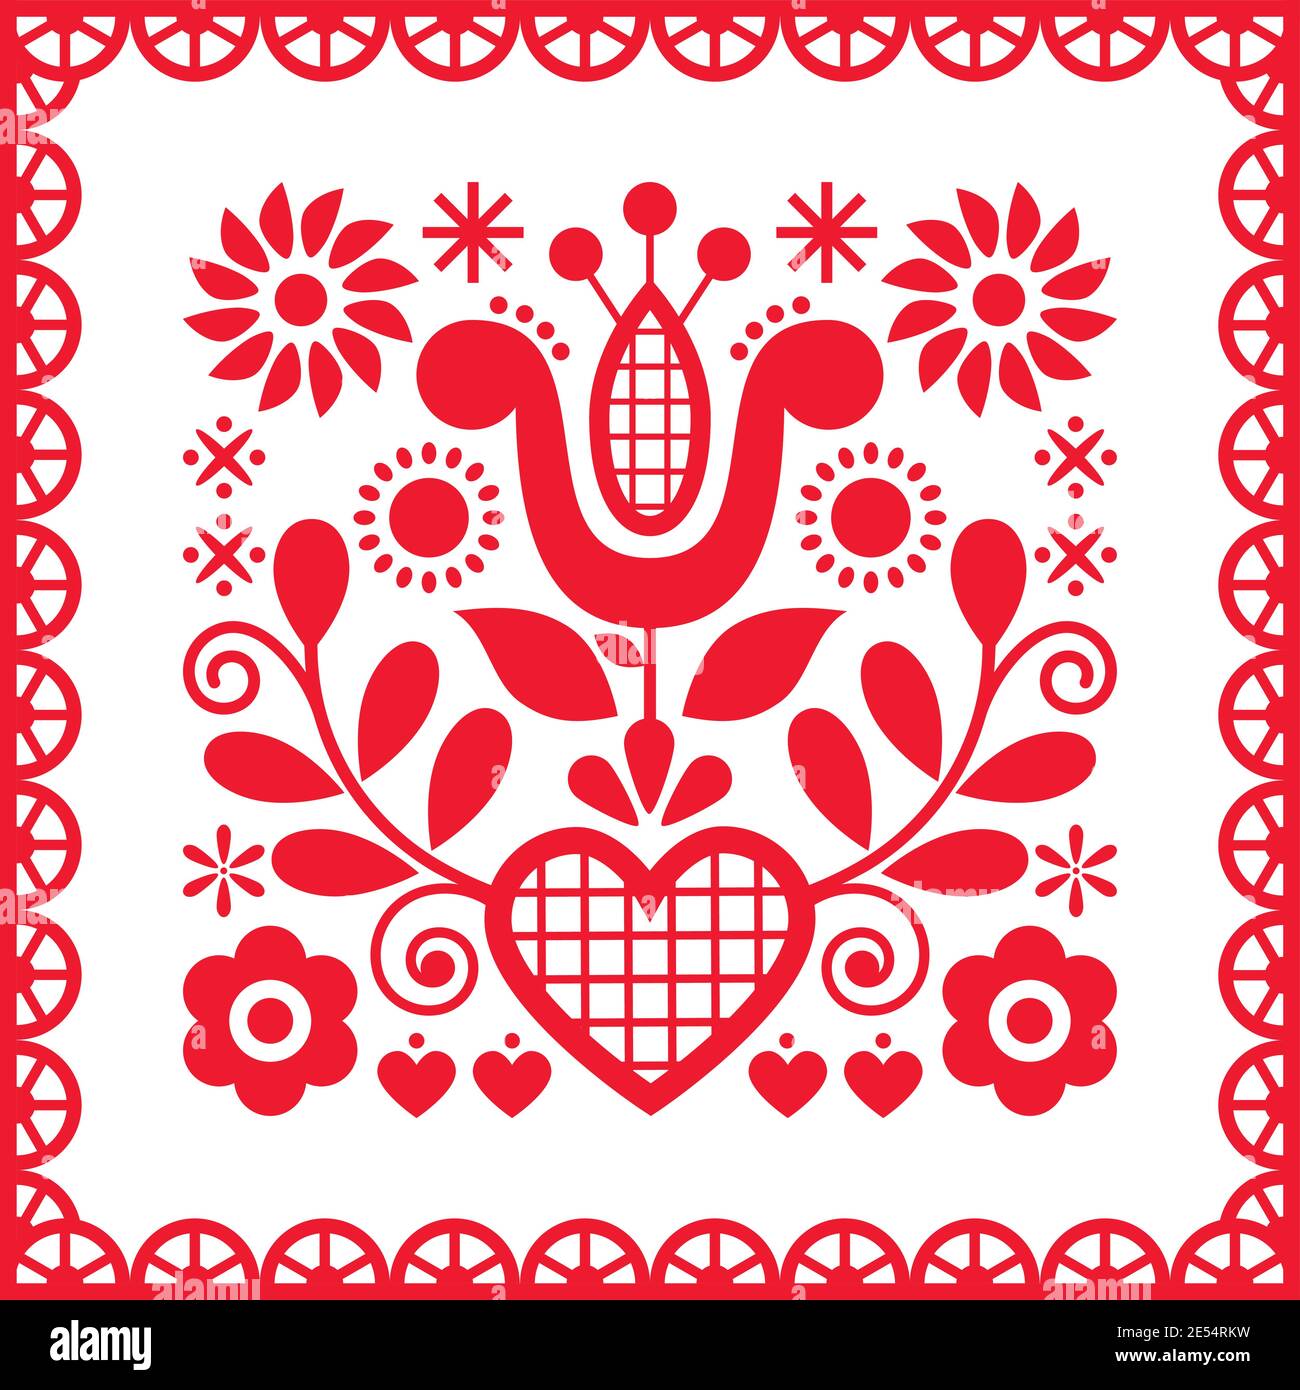 Folk art vector greeting design with flowers and heart from Nowy Sacz in Poland inspired by traditional highlanders embroidery Lachy Sadeckie Stock Vector